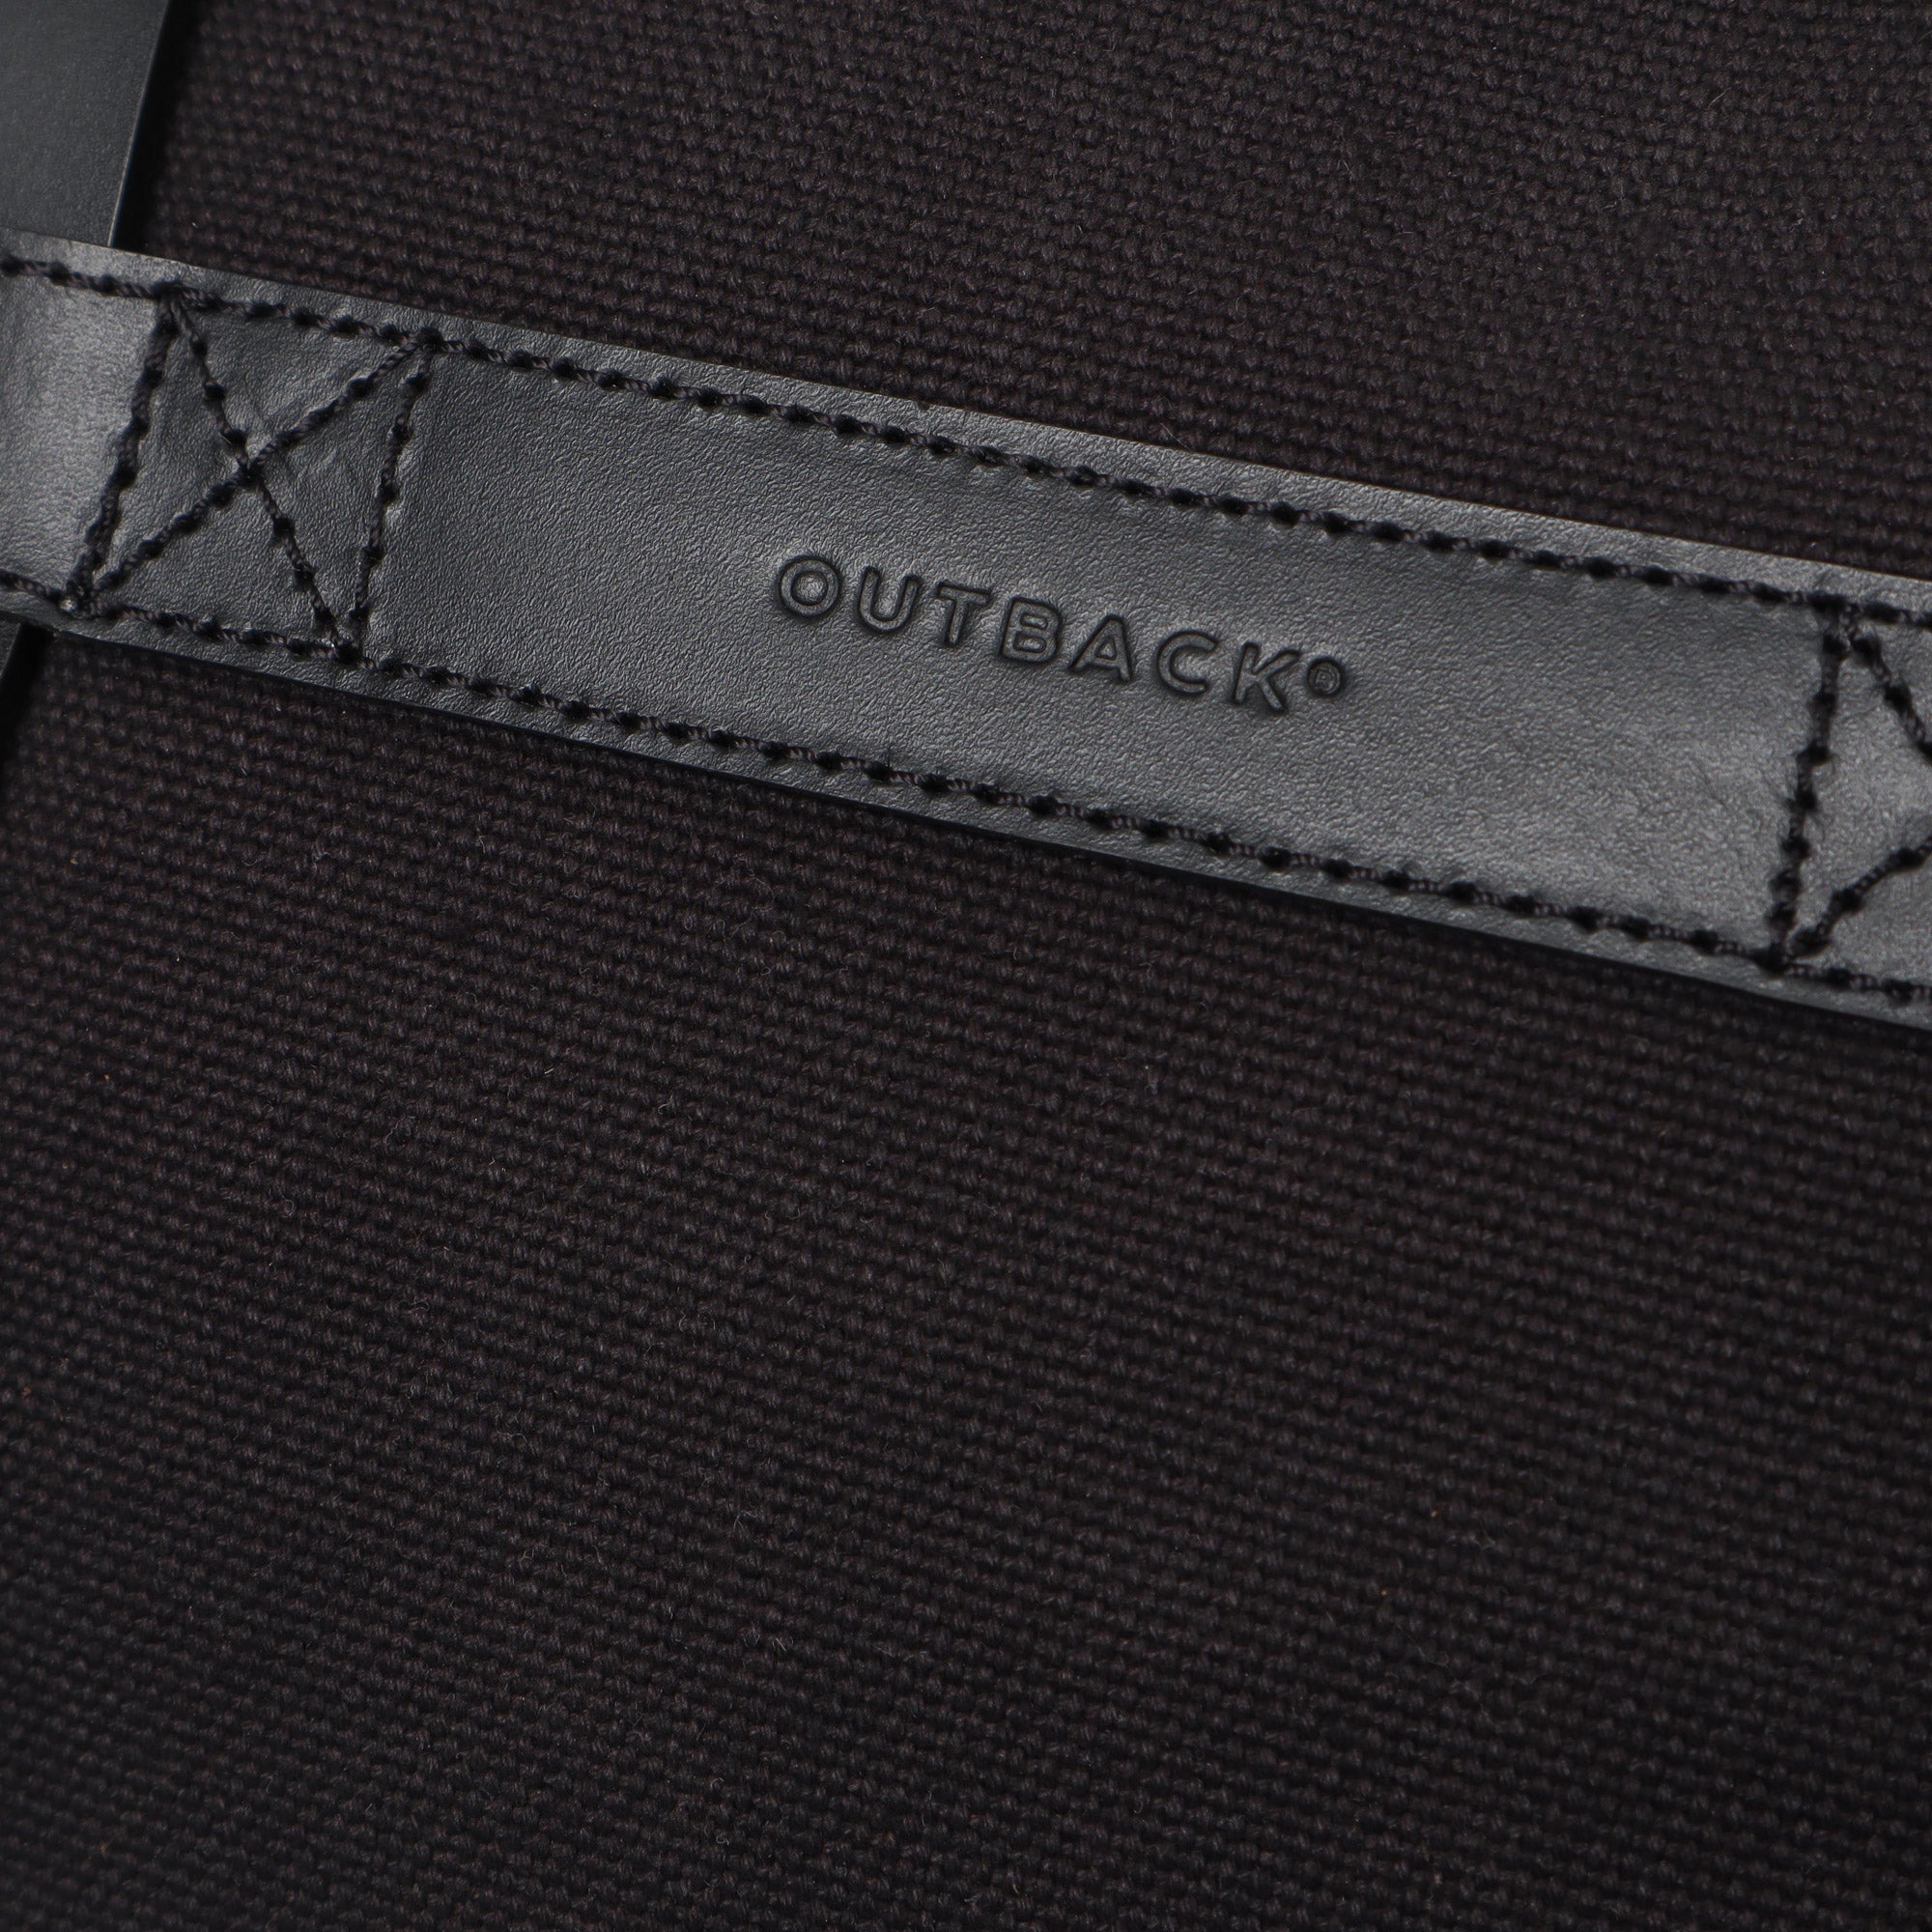 diaper bags from outback